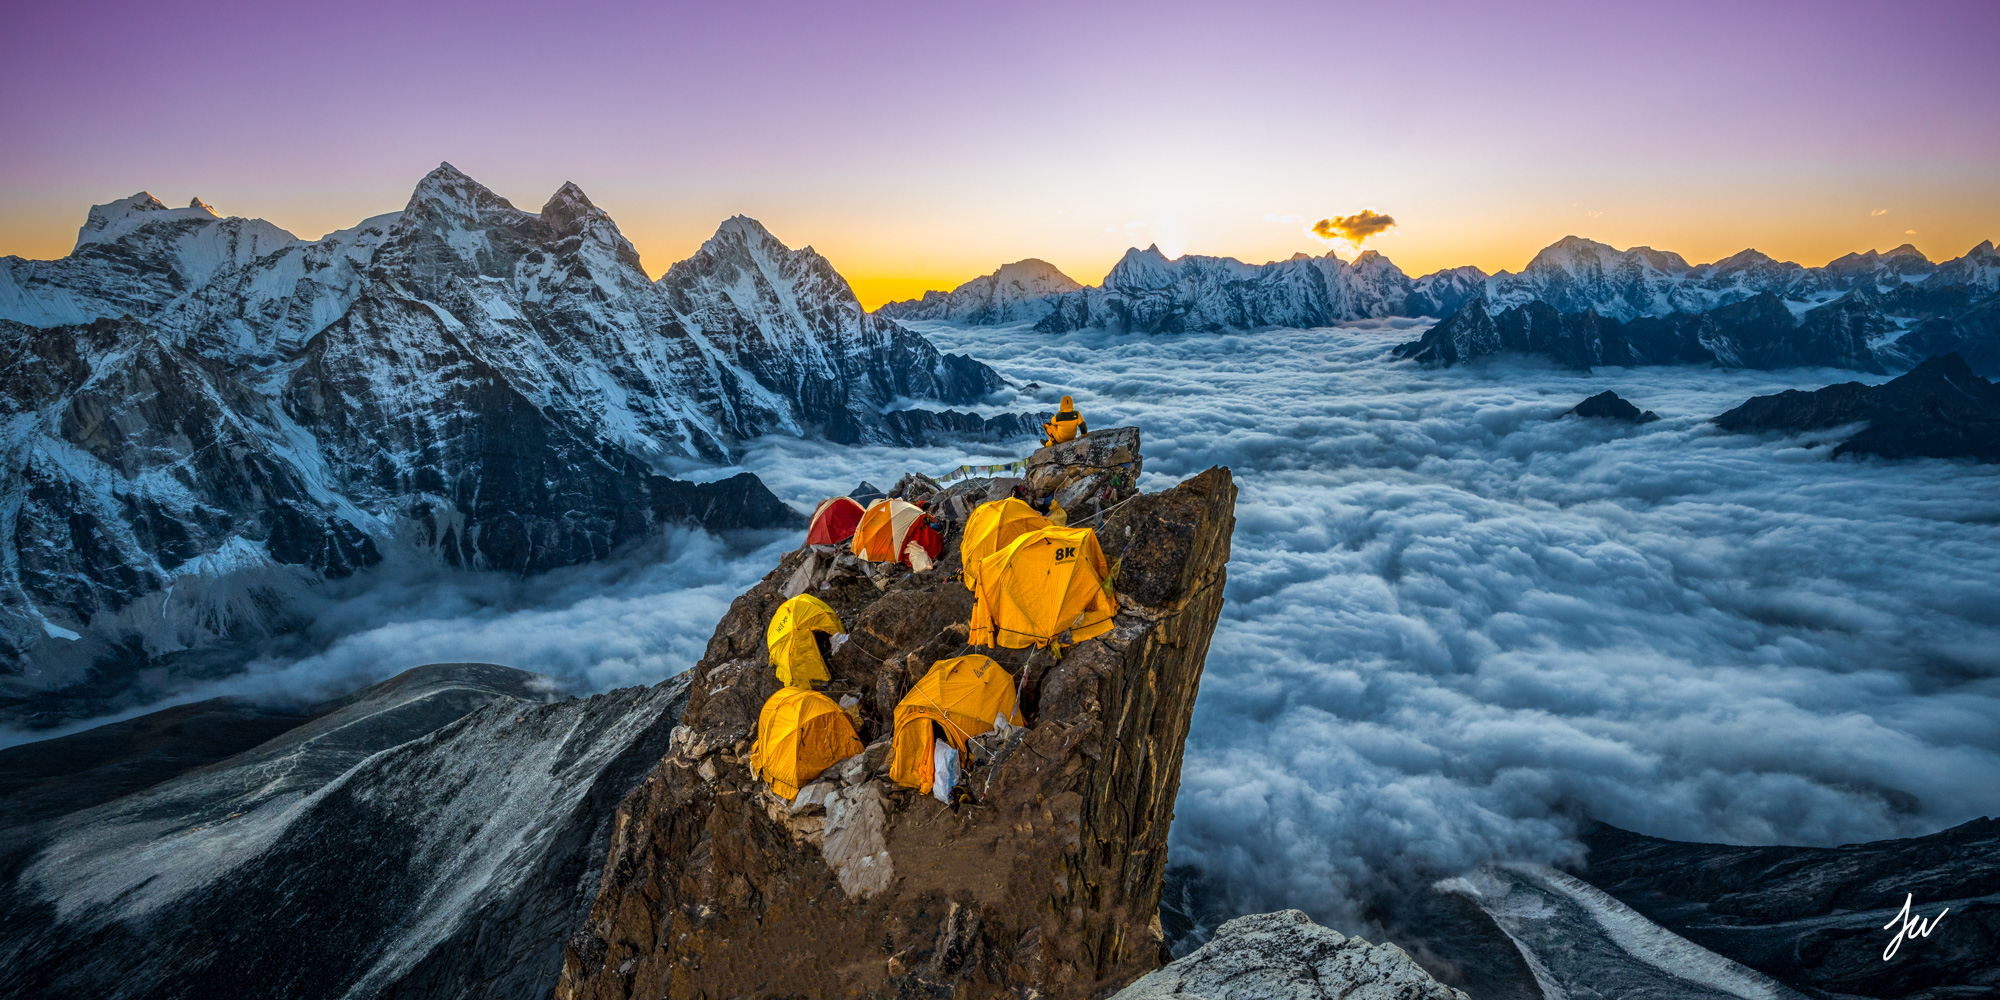 Sunset from Camp 2 on Ama Dablam in Nepal.